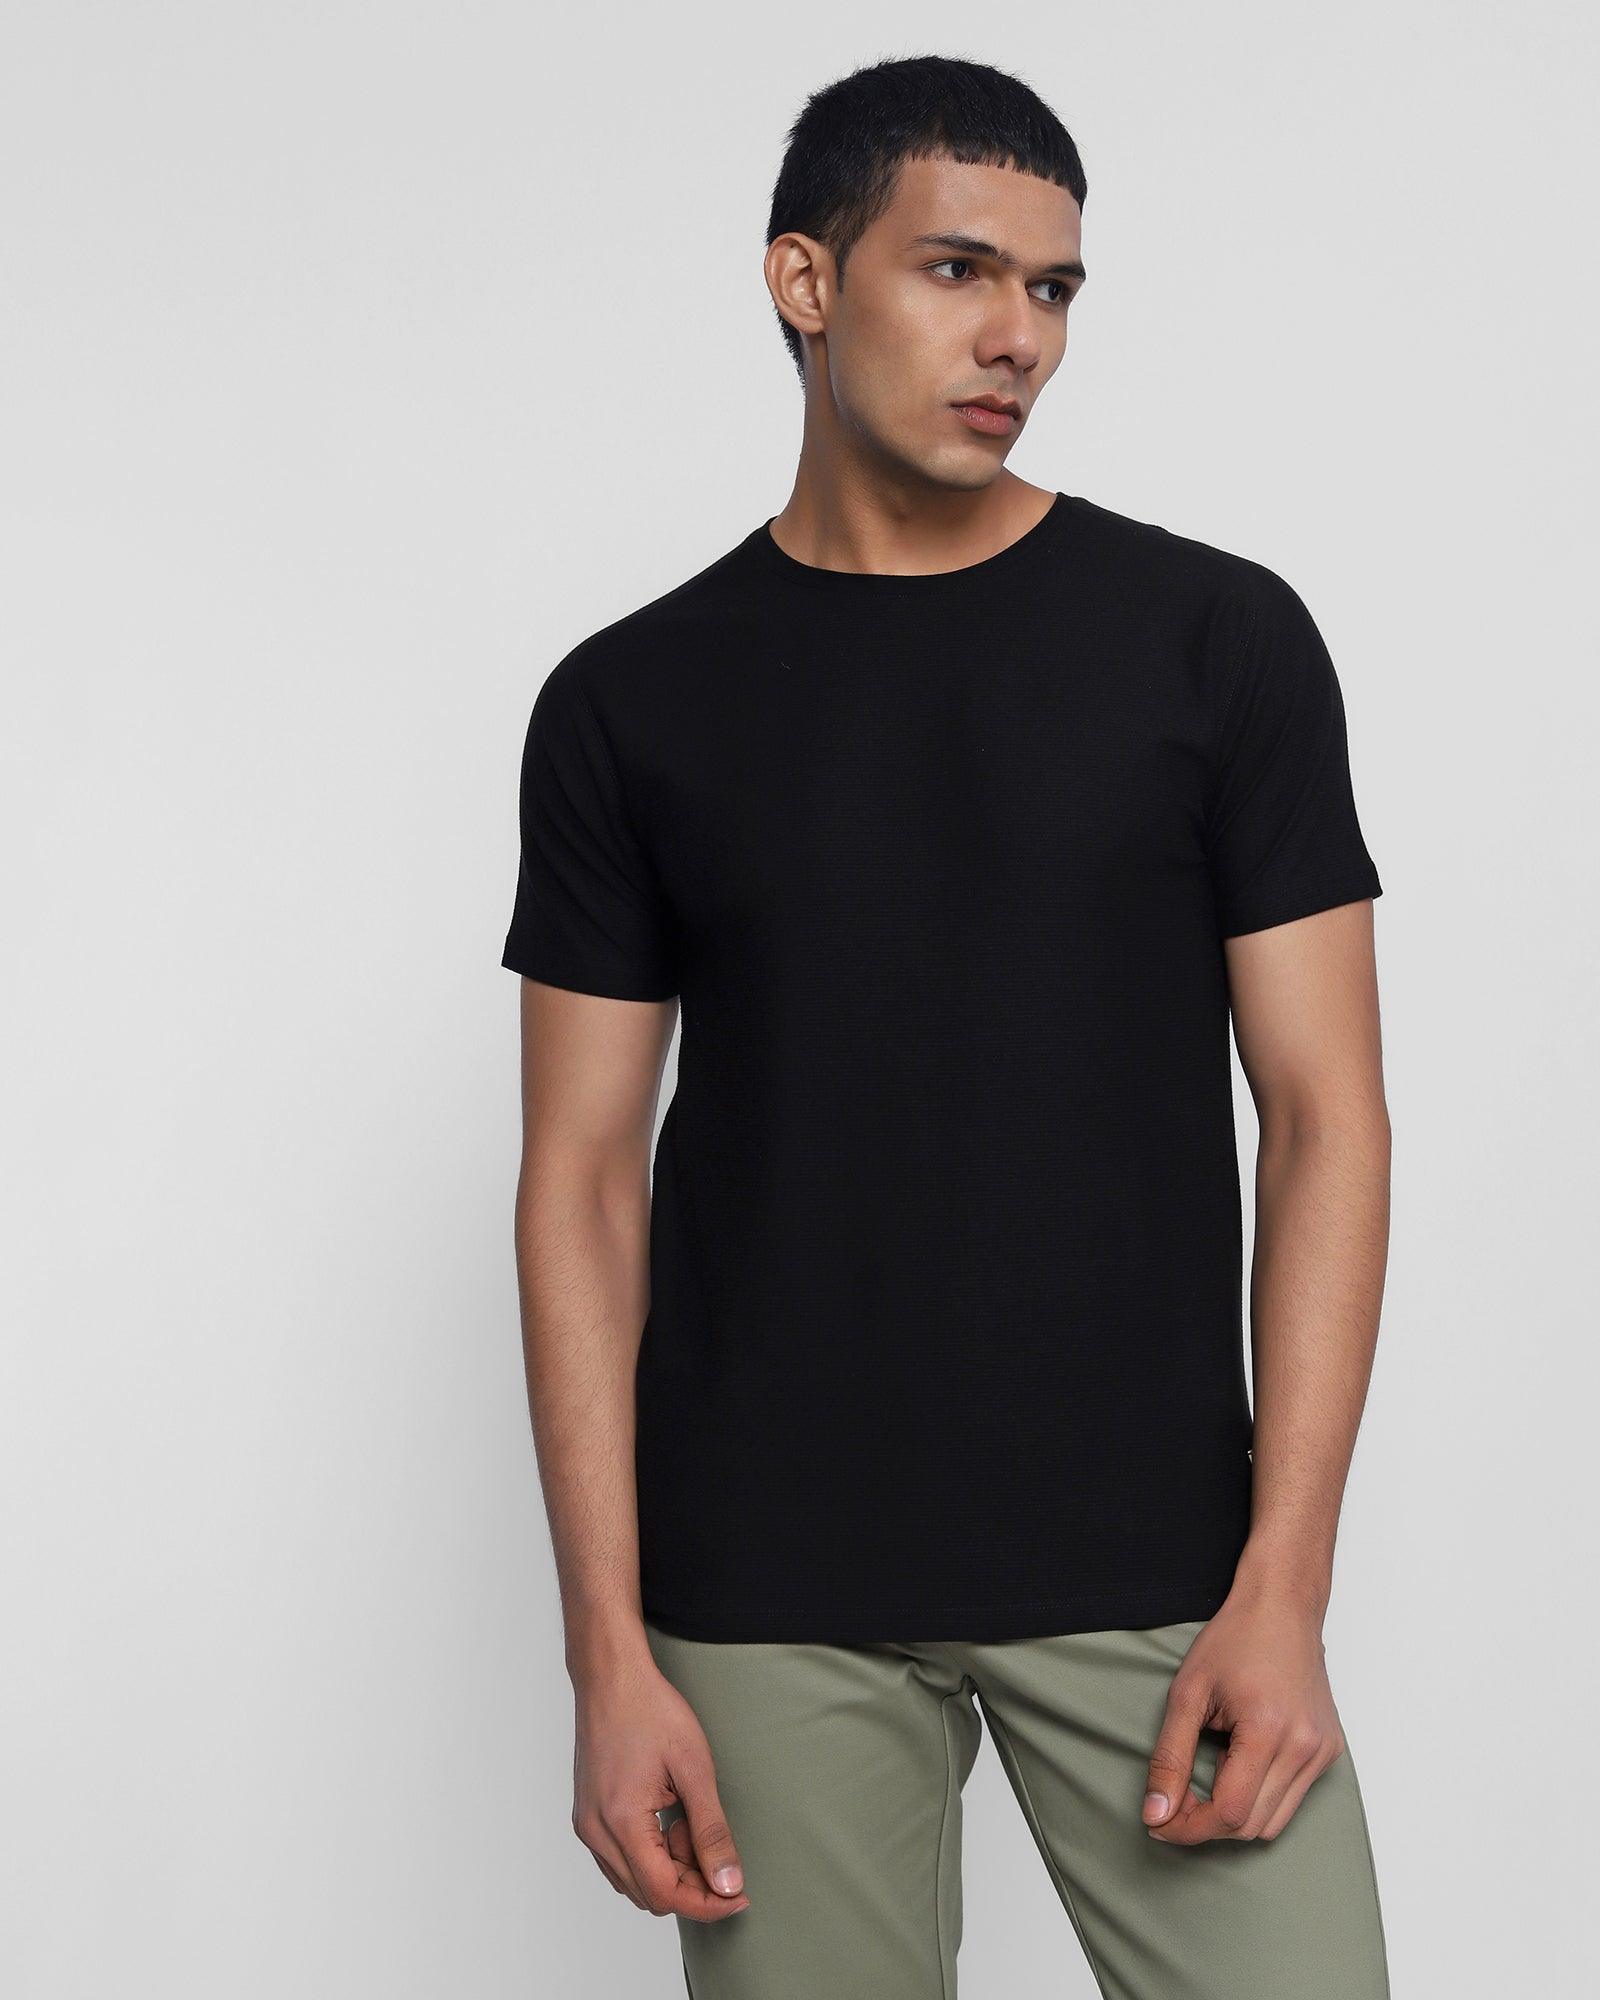 Crew Neck Black Solid T Shirt - Wall